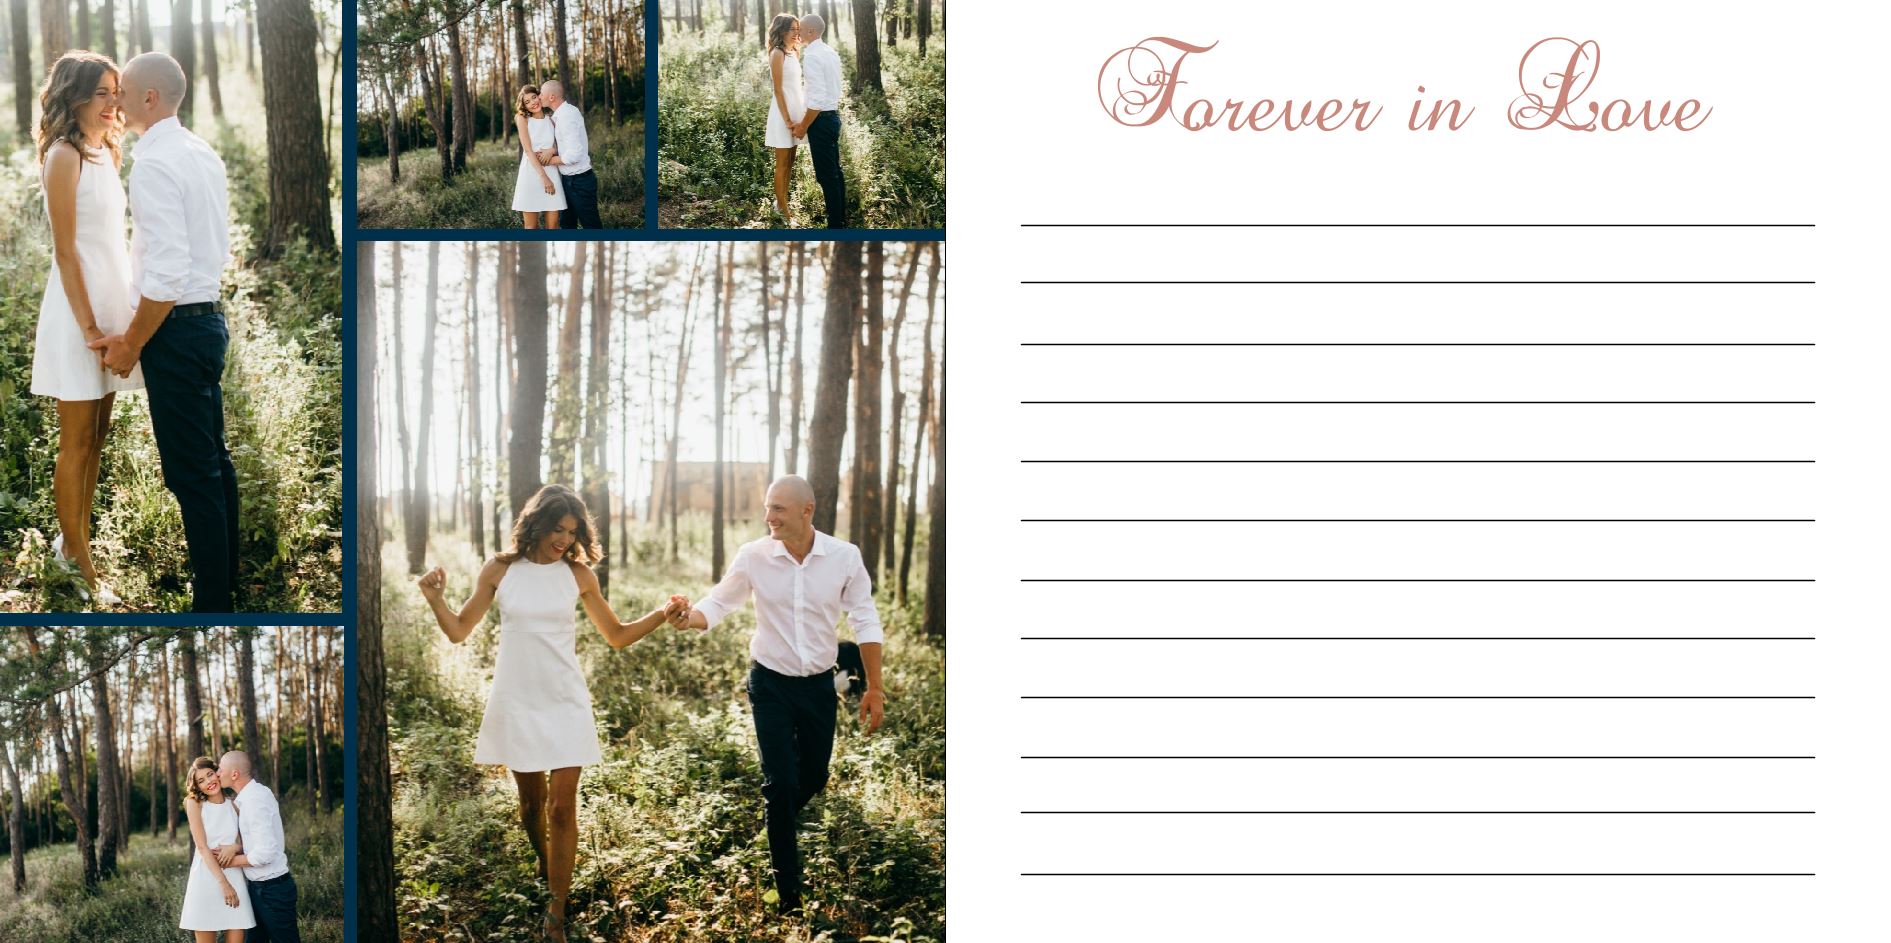 Photo Book - Rose and Navy Wedding Guestbook square 14-15